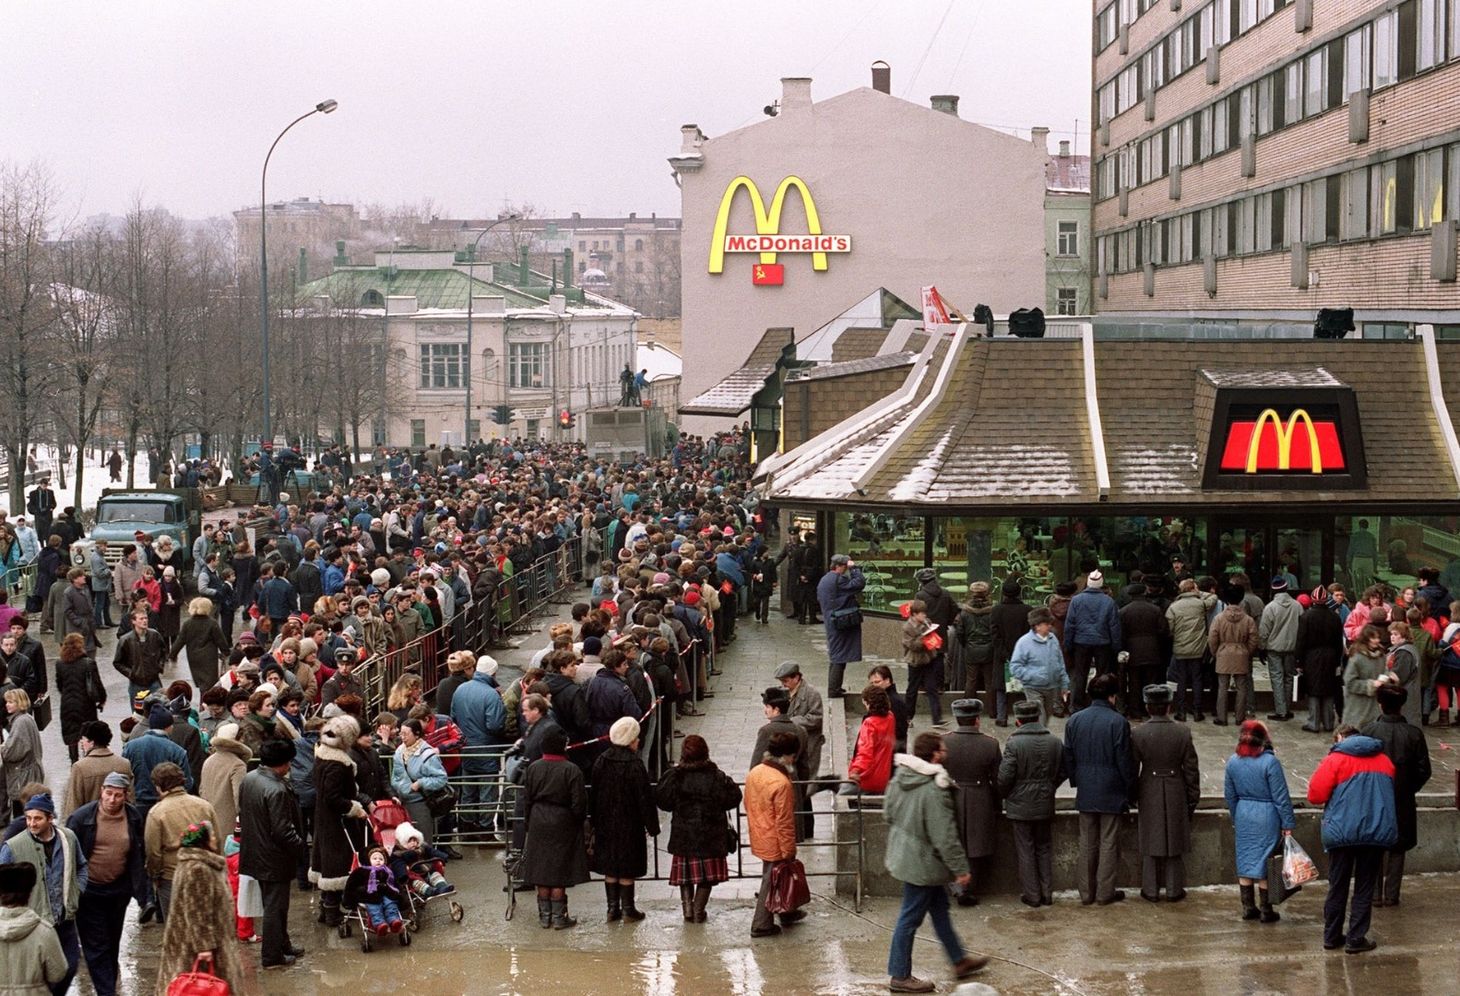 De-Arching: McDonald's to sell Russia business, exit country